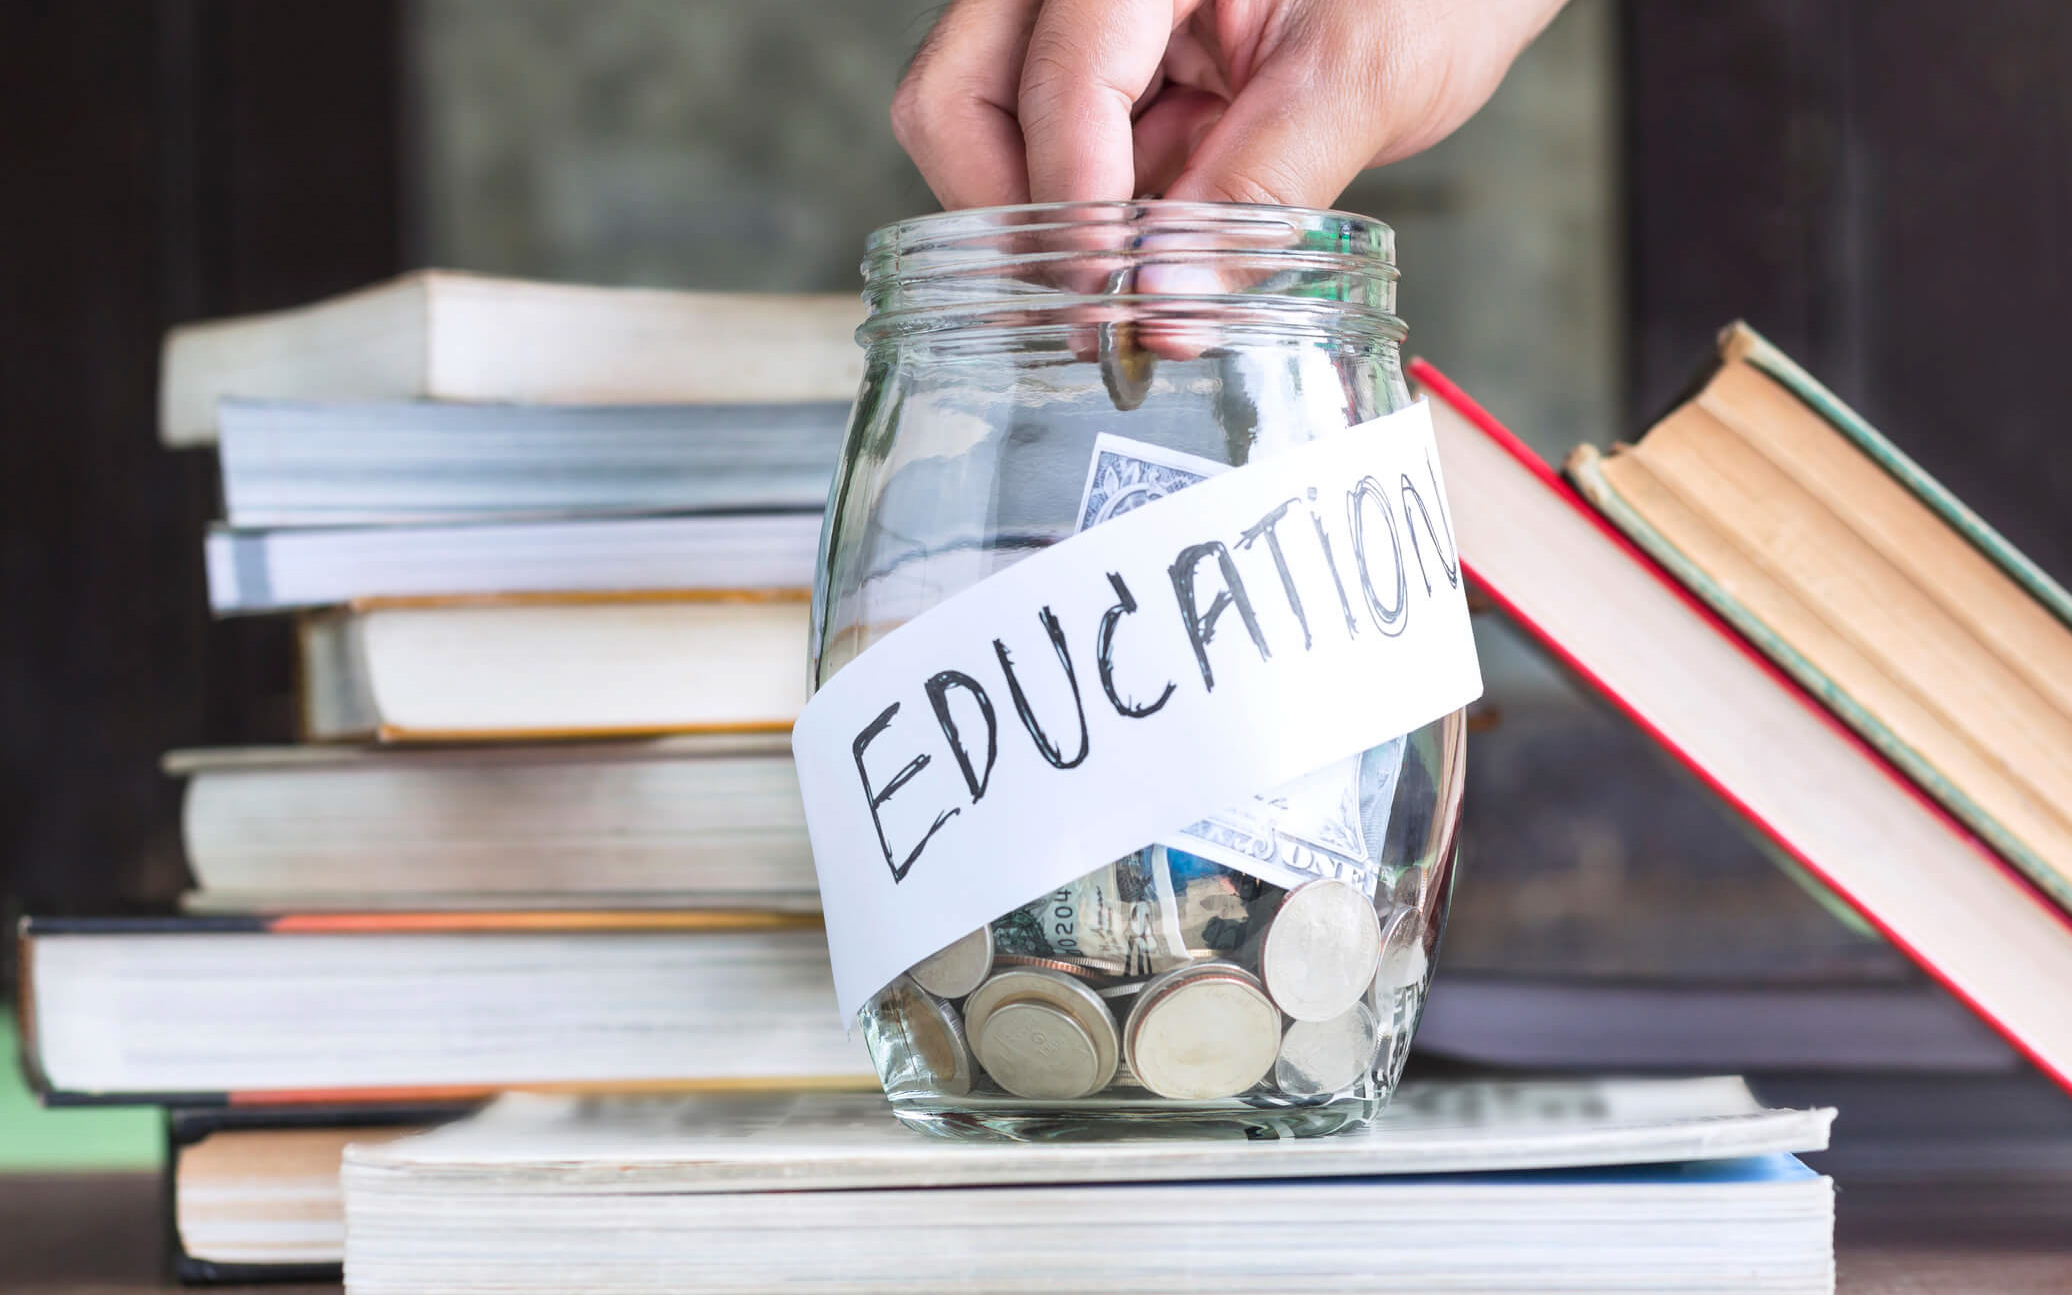 5 Strategies for Budgeting Your Child's Education